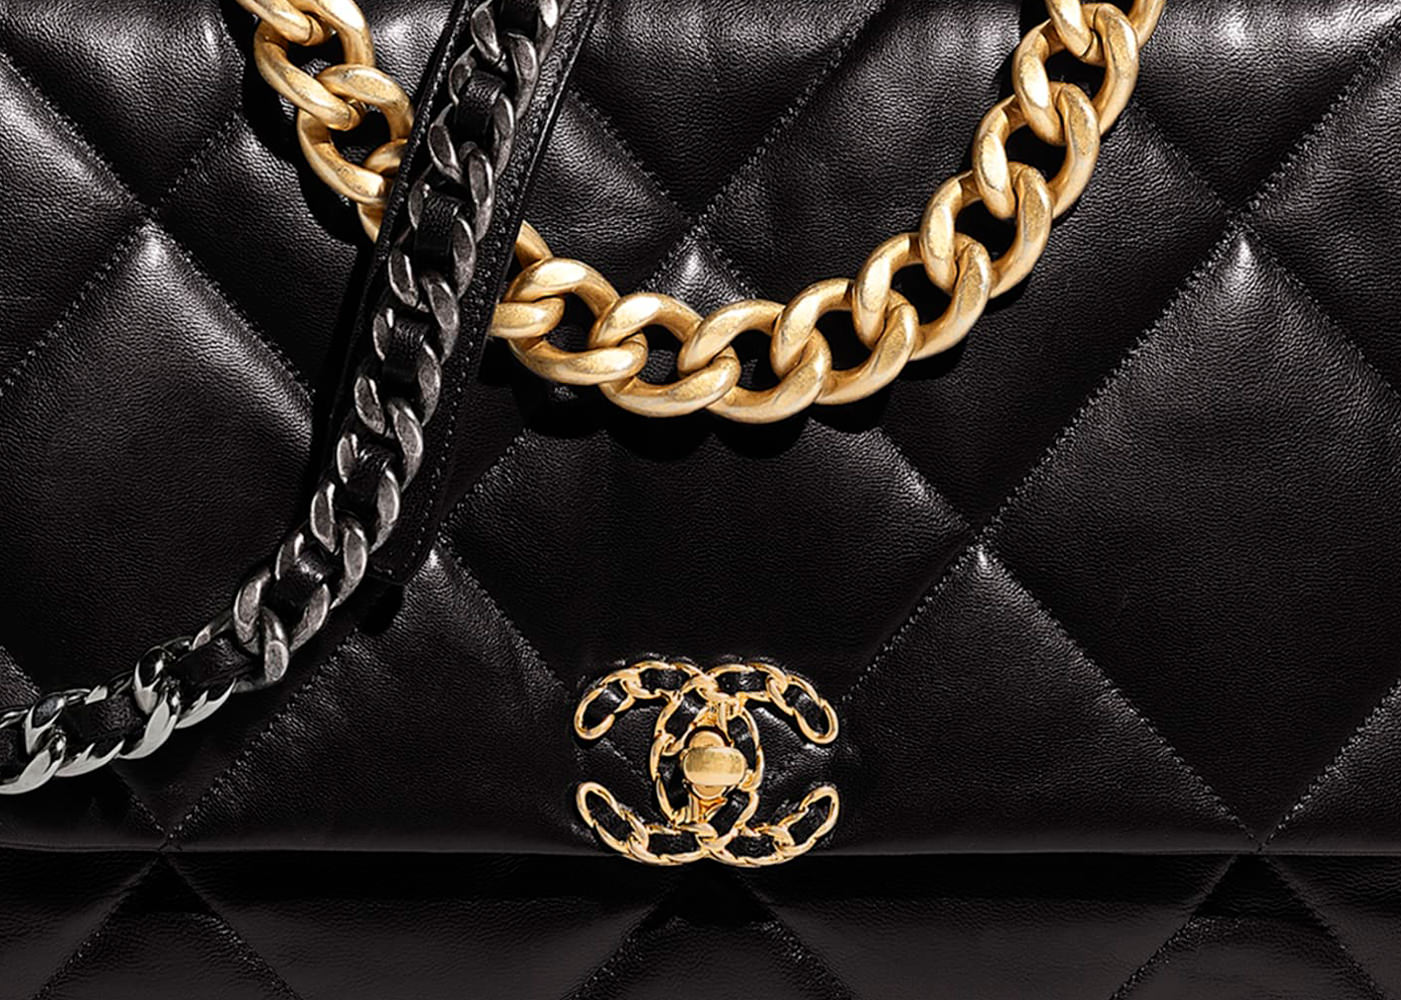 Chanel's 19 Bag Is The Perfect Companion For This Season